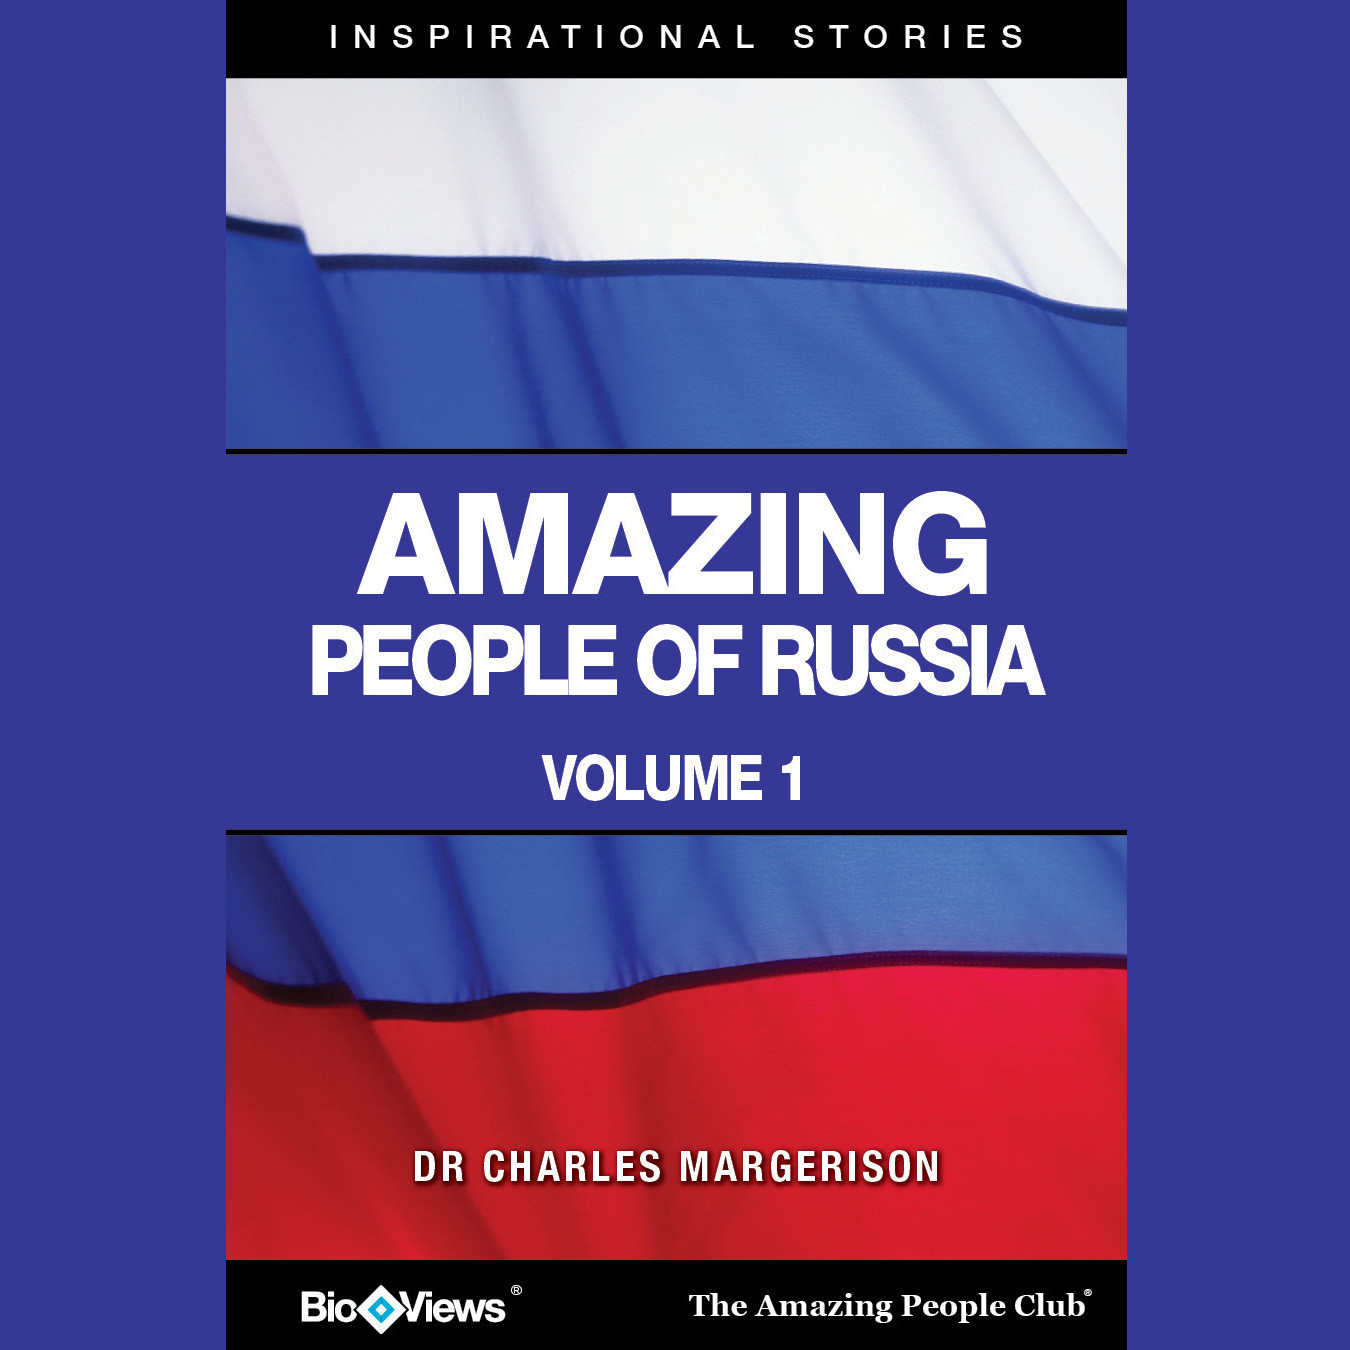 Amazing People of Russia, Vol. 1: Inspirational Stories Audiobook, by Charles Margerison